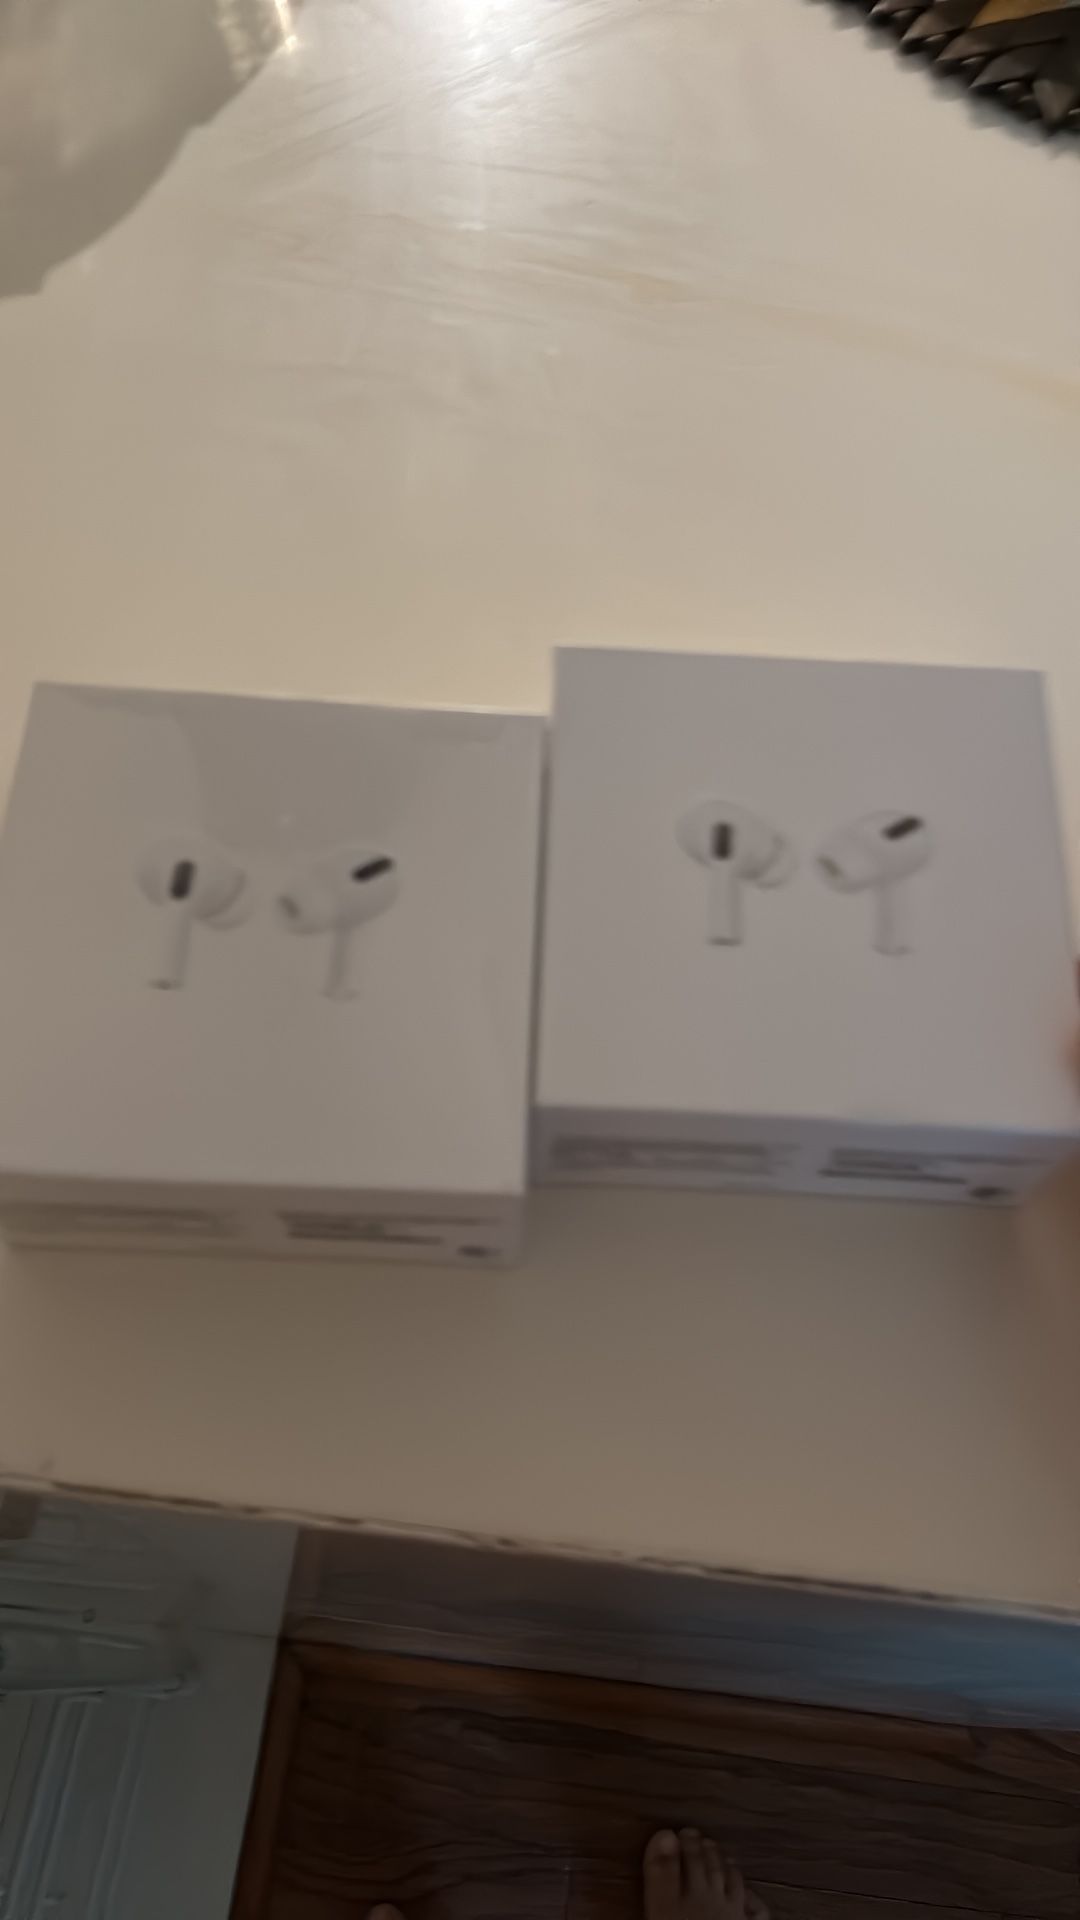 selling airpods pro’s first generation 